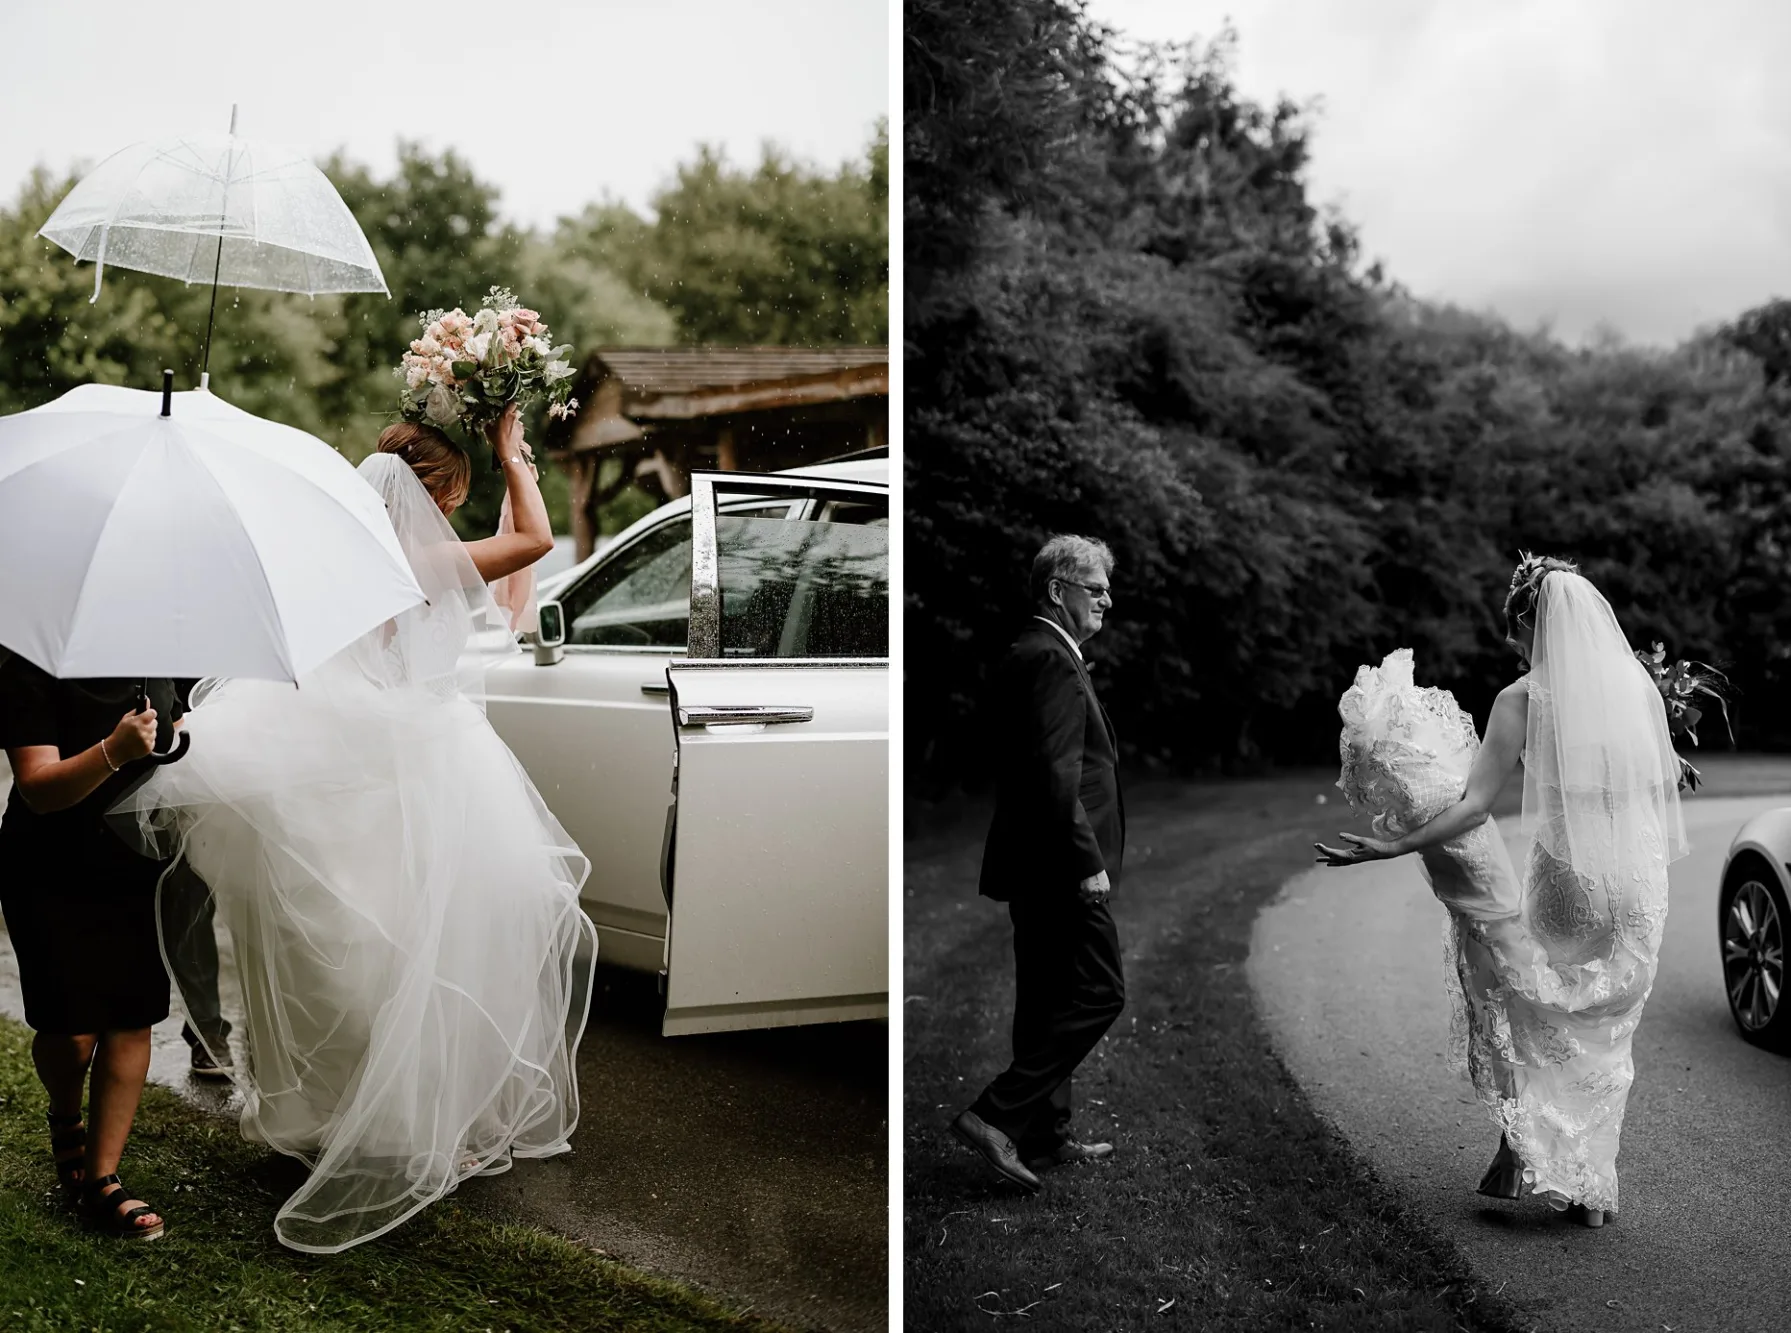 Two photographs of brides arriving for their wedding at Oaklands Grand Lodge. The first photo shows a bride exiting the car holding a bouquet over her held to shelter from the rain. The second photograph shows a bride throwing her dress over her arm. 